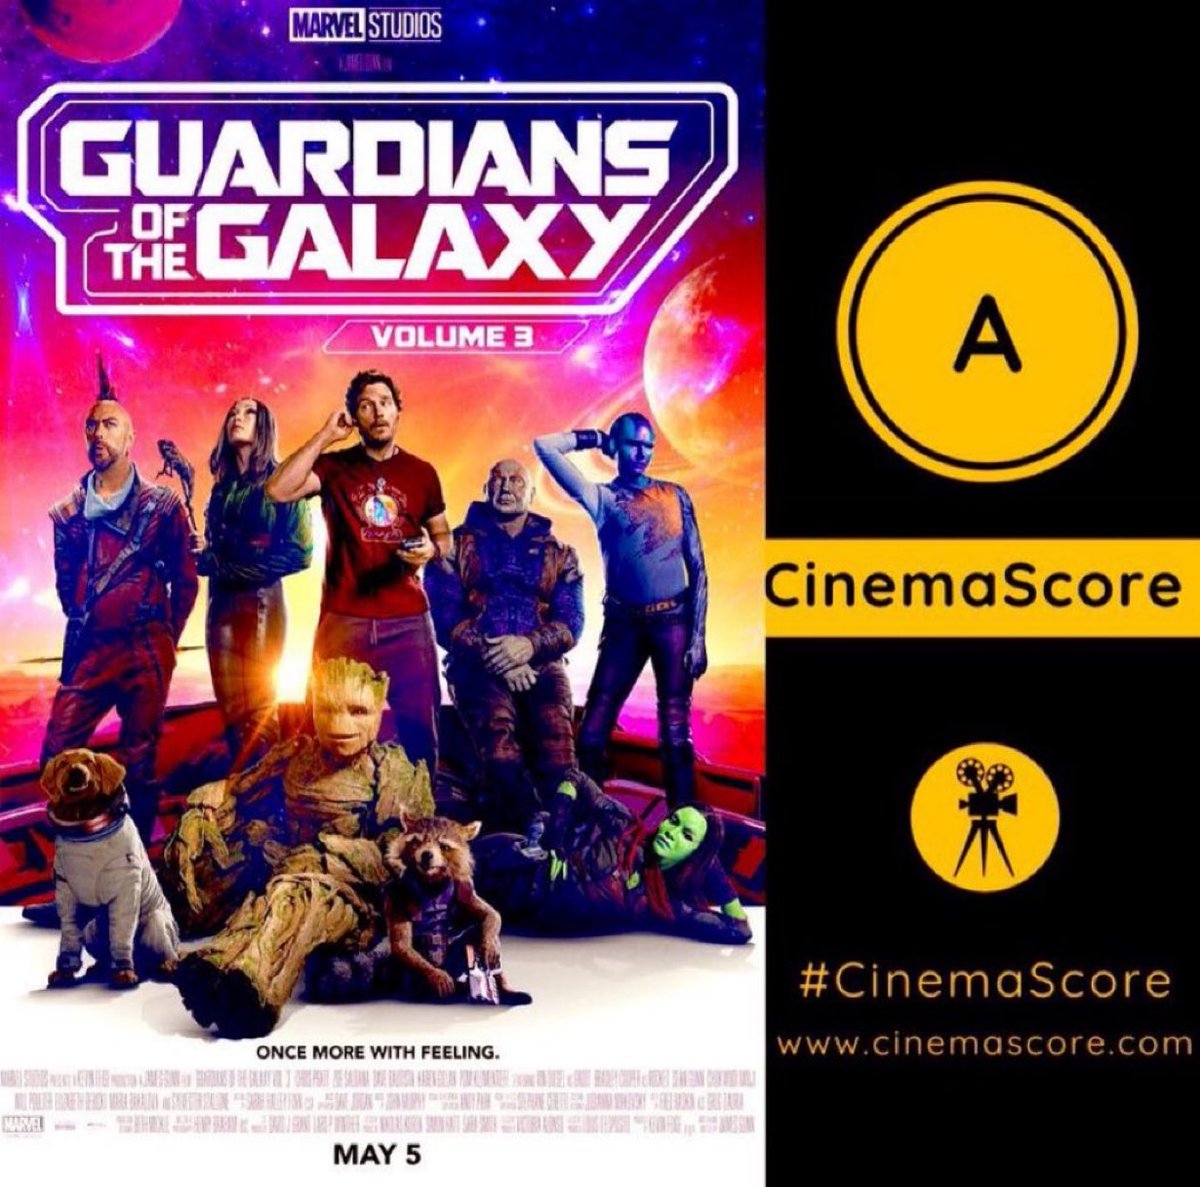 #GuardiansOfTheGalaxyVol3 beats #Deadpool2 & #SuicideSquad runs at US #BoxOffice.
Solid 1.6M on 5th TUE!
Strong hold: -39.1% from last TUE despite #Spiderverse!
(vs #MoM 1.3M, -29.3%
#GoTGVol2 1.4M, -35.2%)
#GoTGVol3 hits 326M cume!
Will beat #BvS on SAT
Eyeing a 345M-360M US run